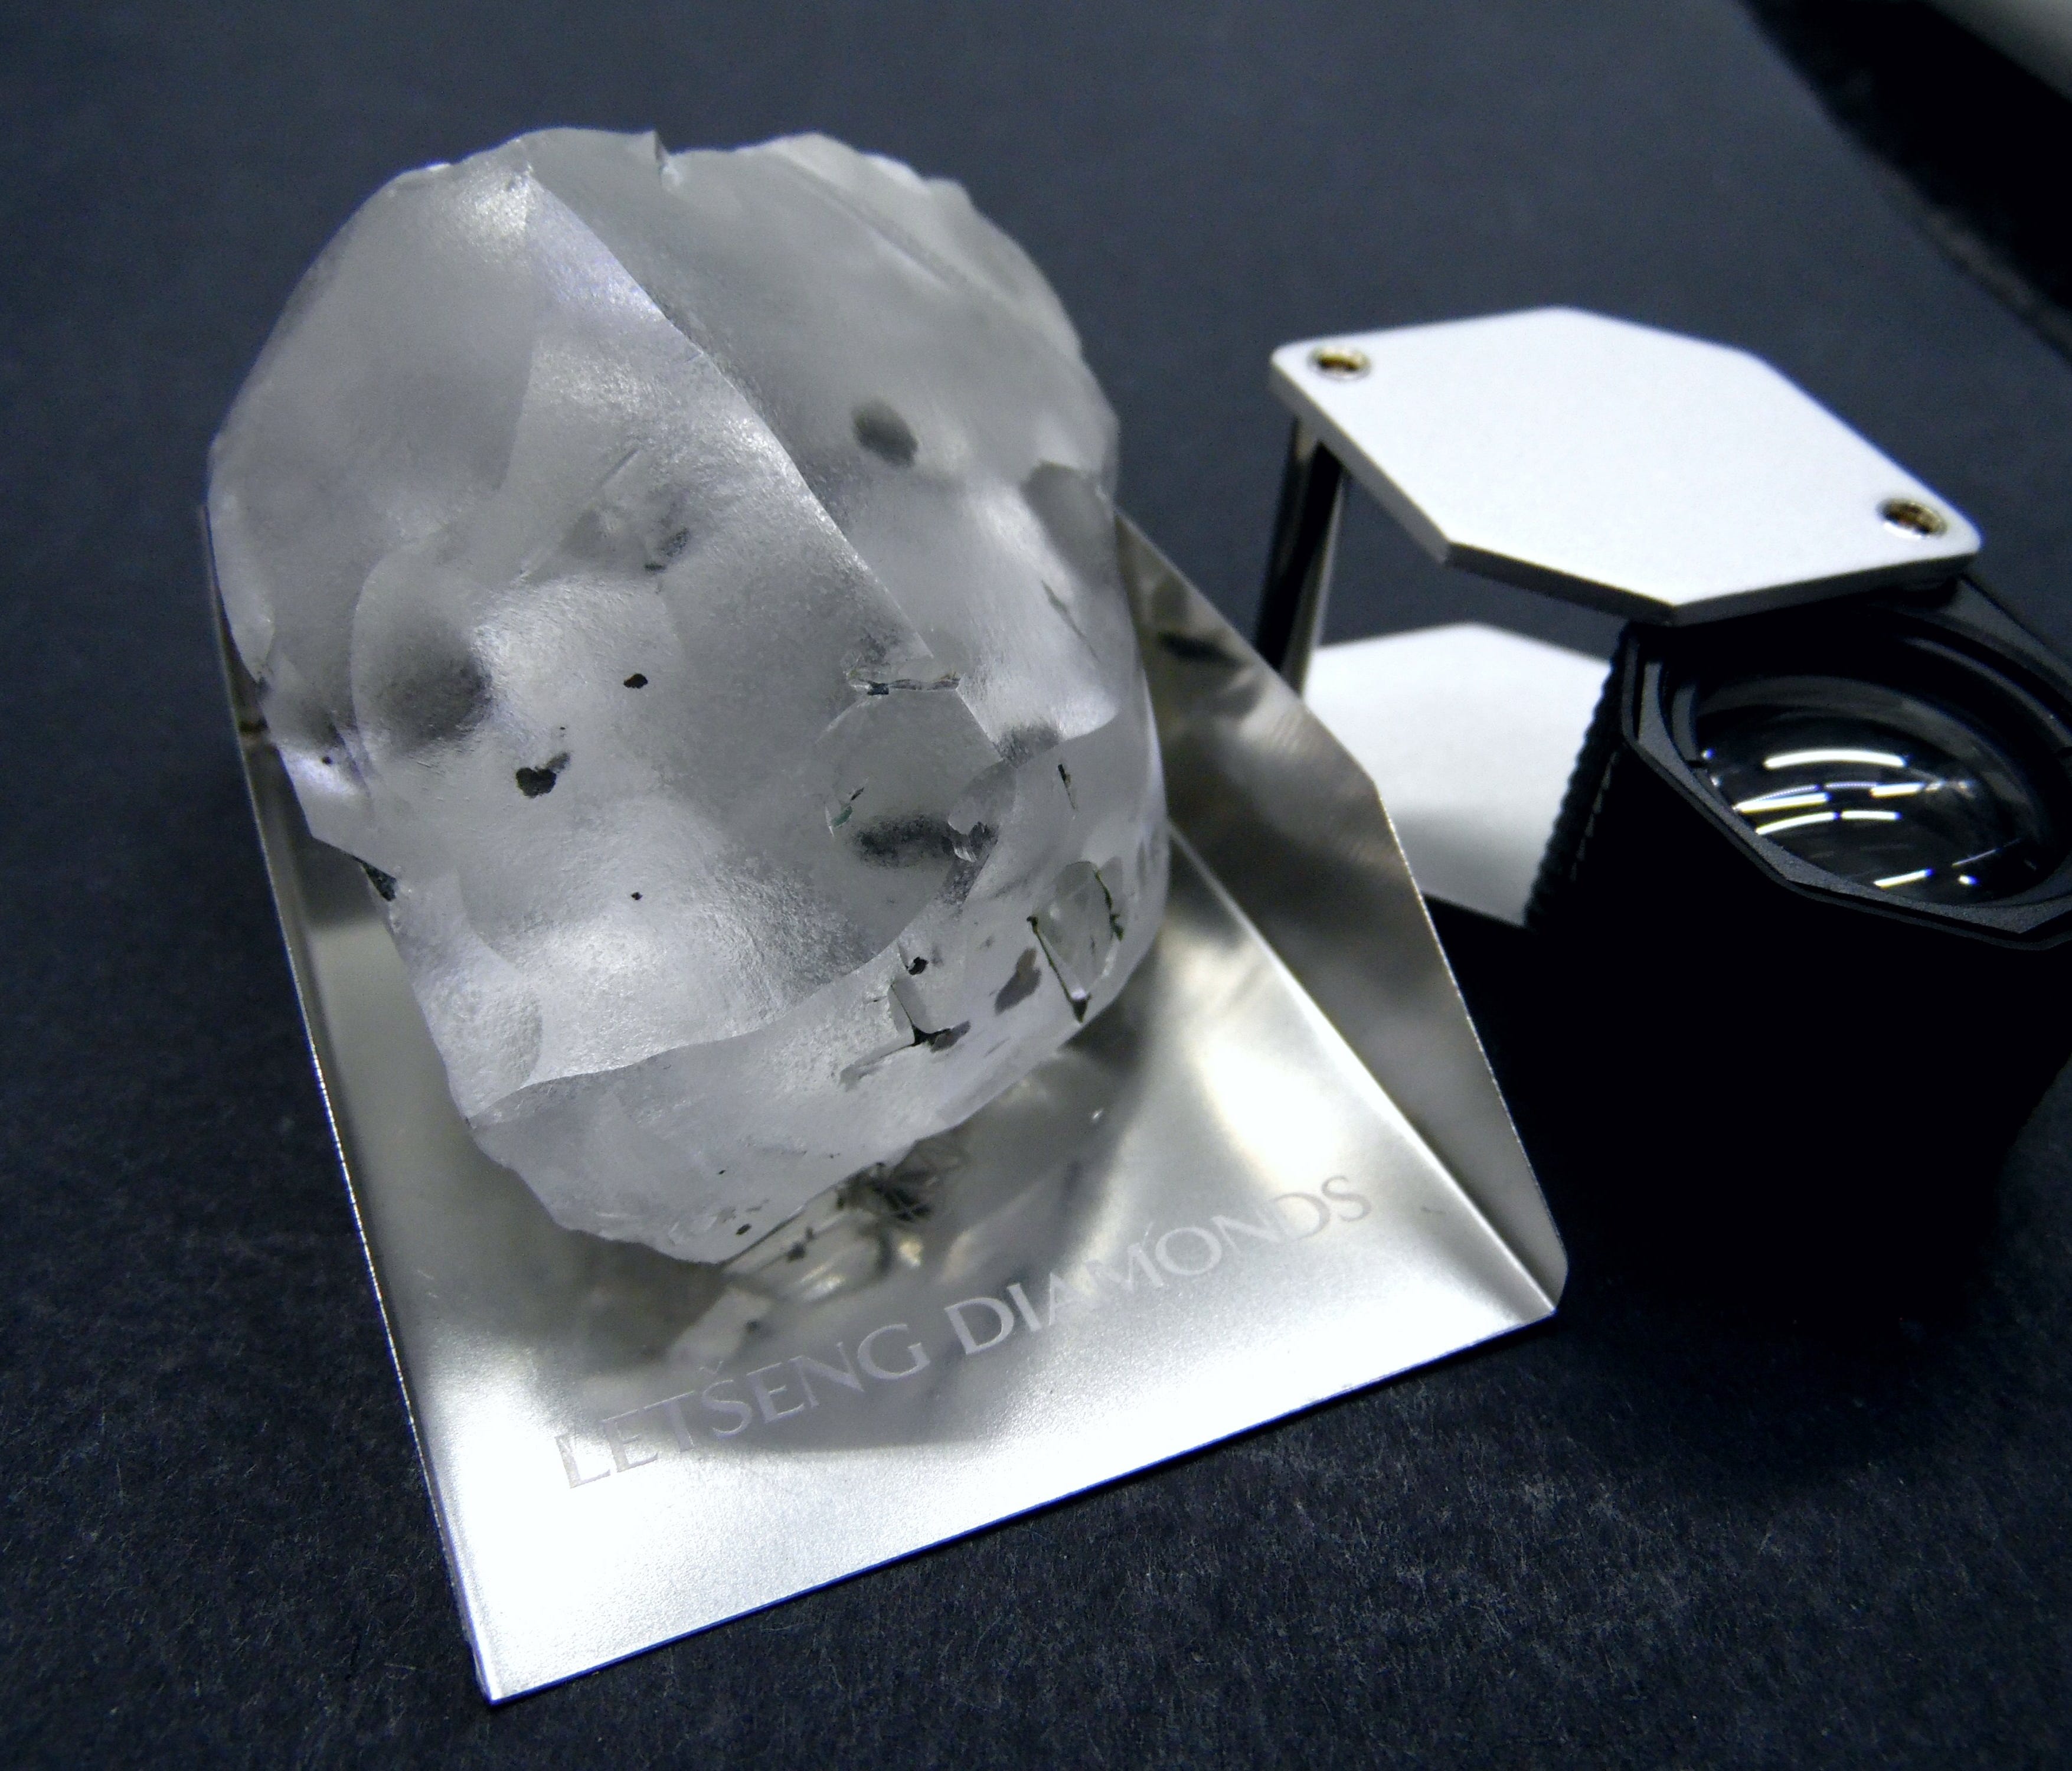 This handout photo from Gem Diamonds shows what's believed to be the world's 5th biggest diamond ever found, a 910-carat stone found in Lesotho's Letseng mine.